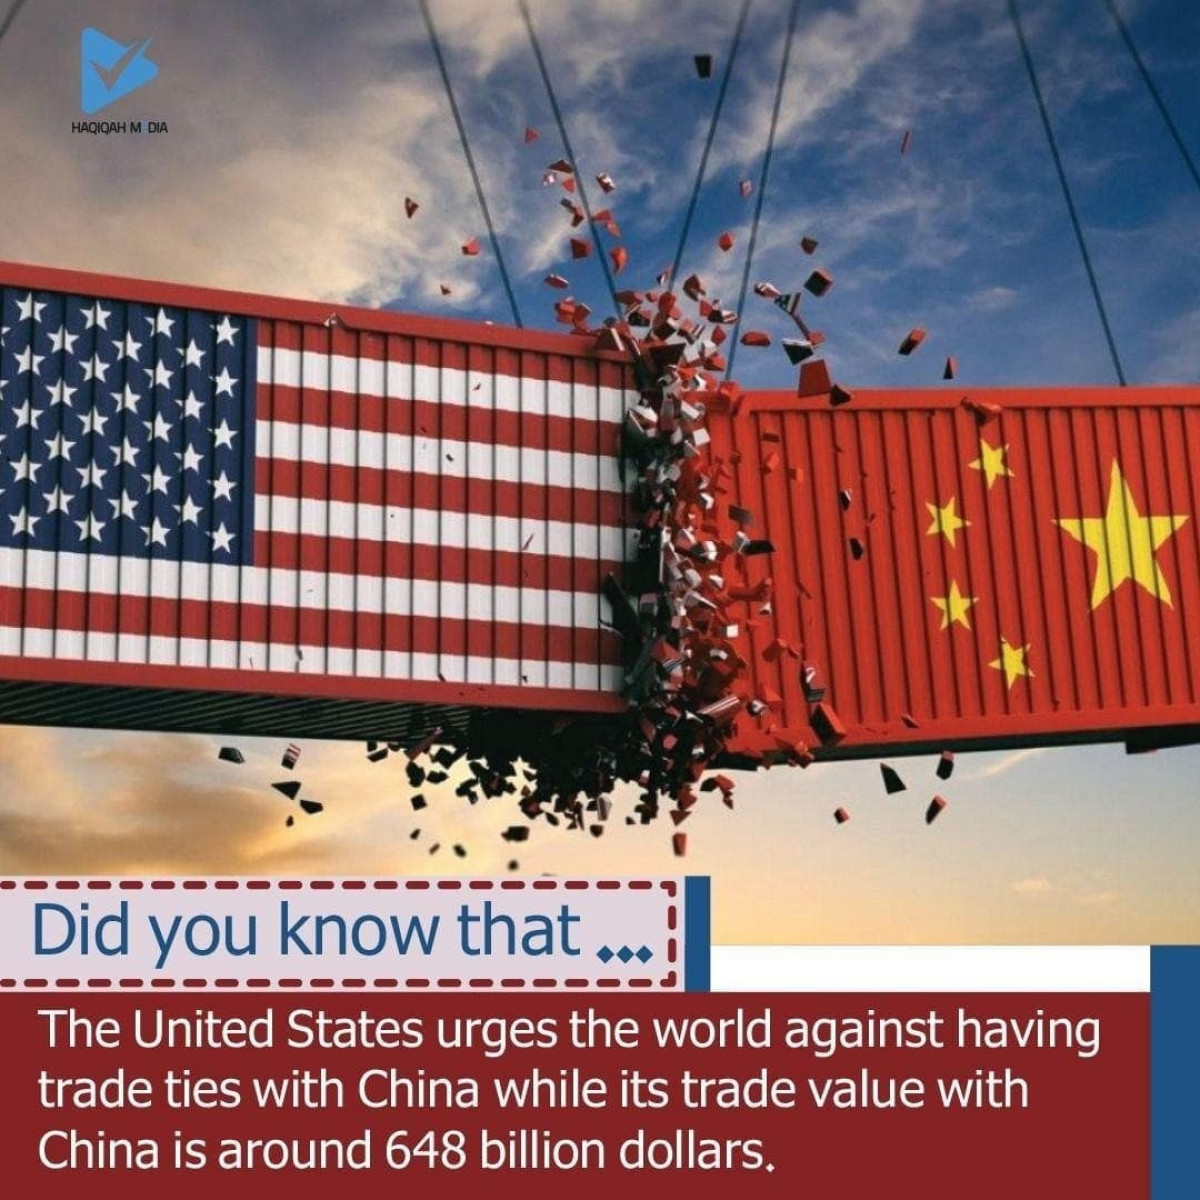 The United States urges the world against having trade ties with China while its trade value with China is around 648 billion dollars